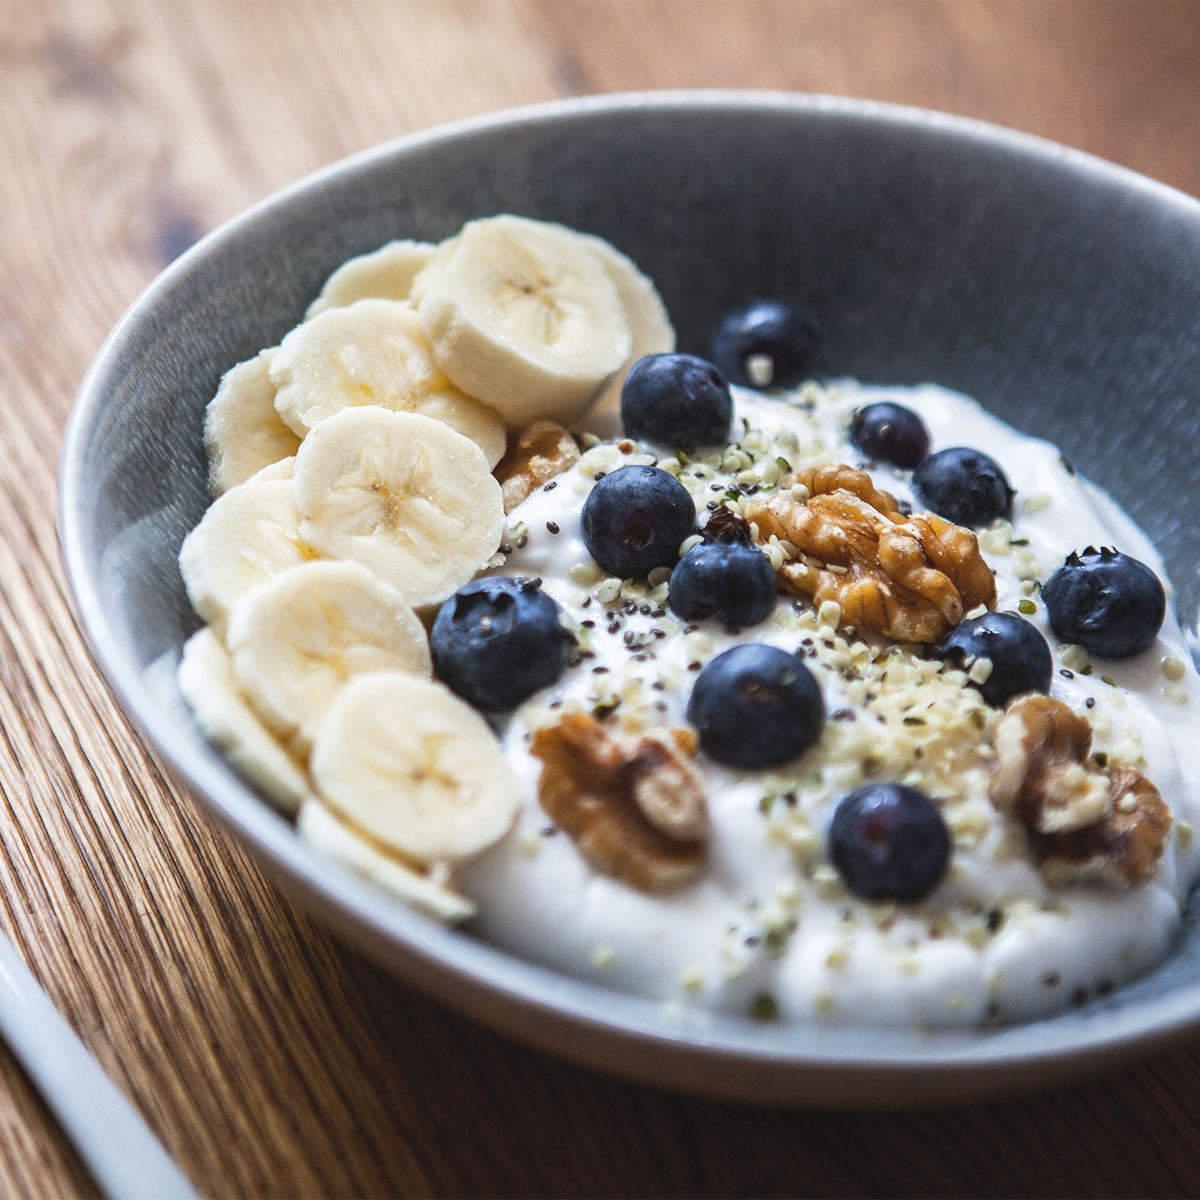 bowl of yogurt topped with walnuts, blueberries, and banana